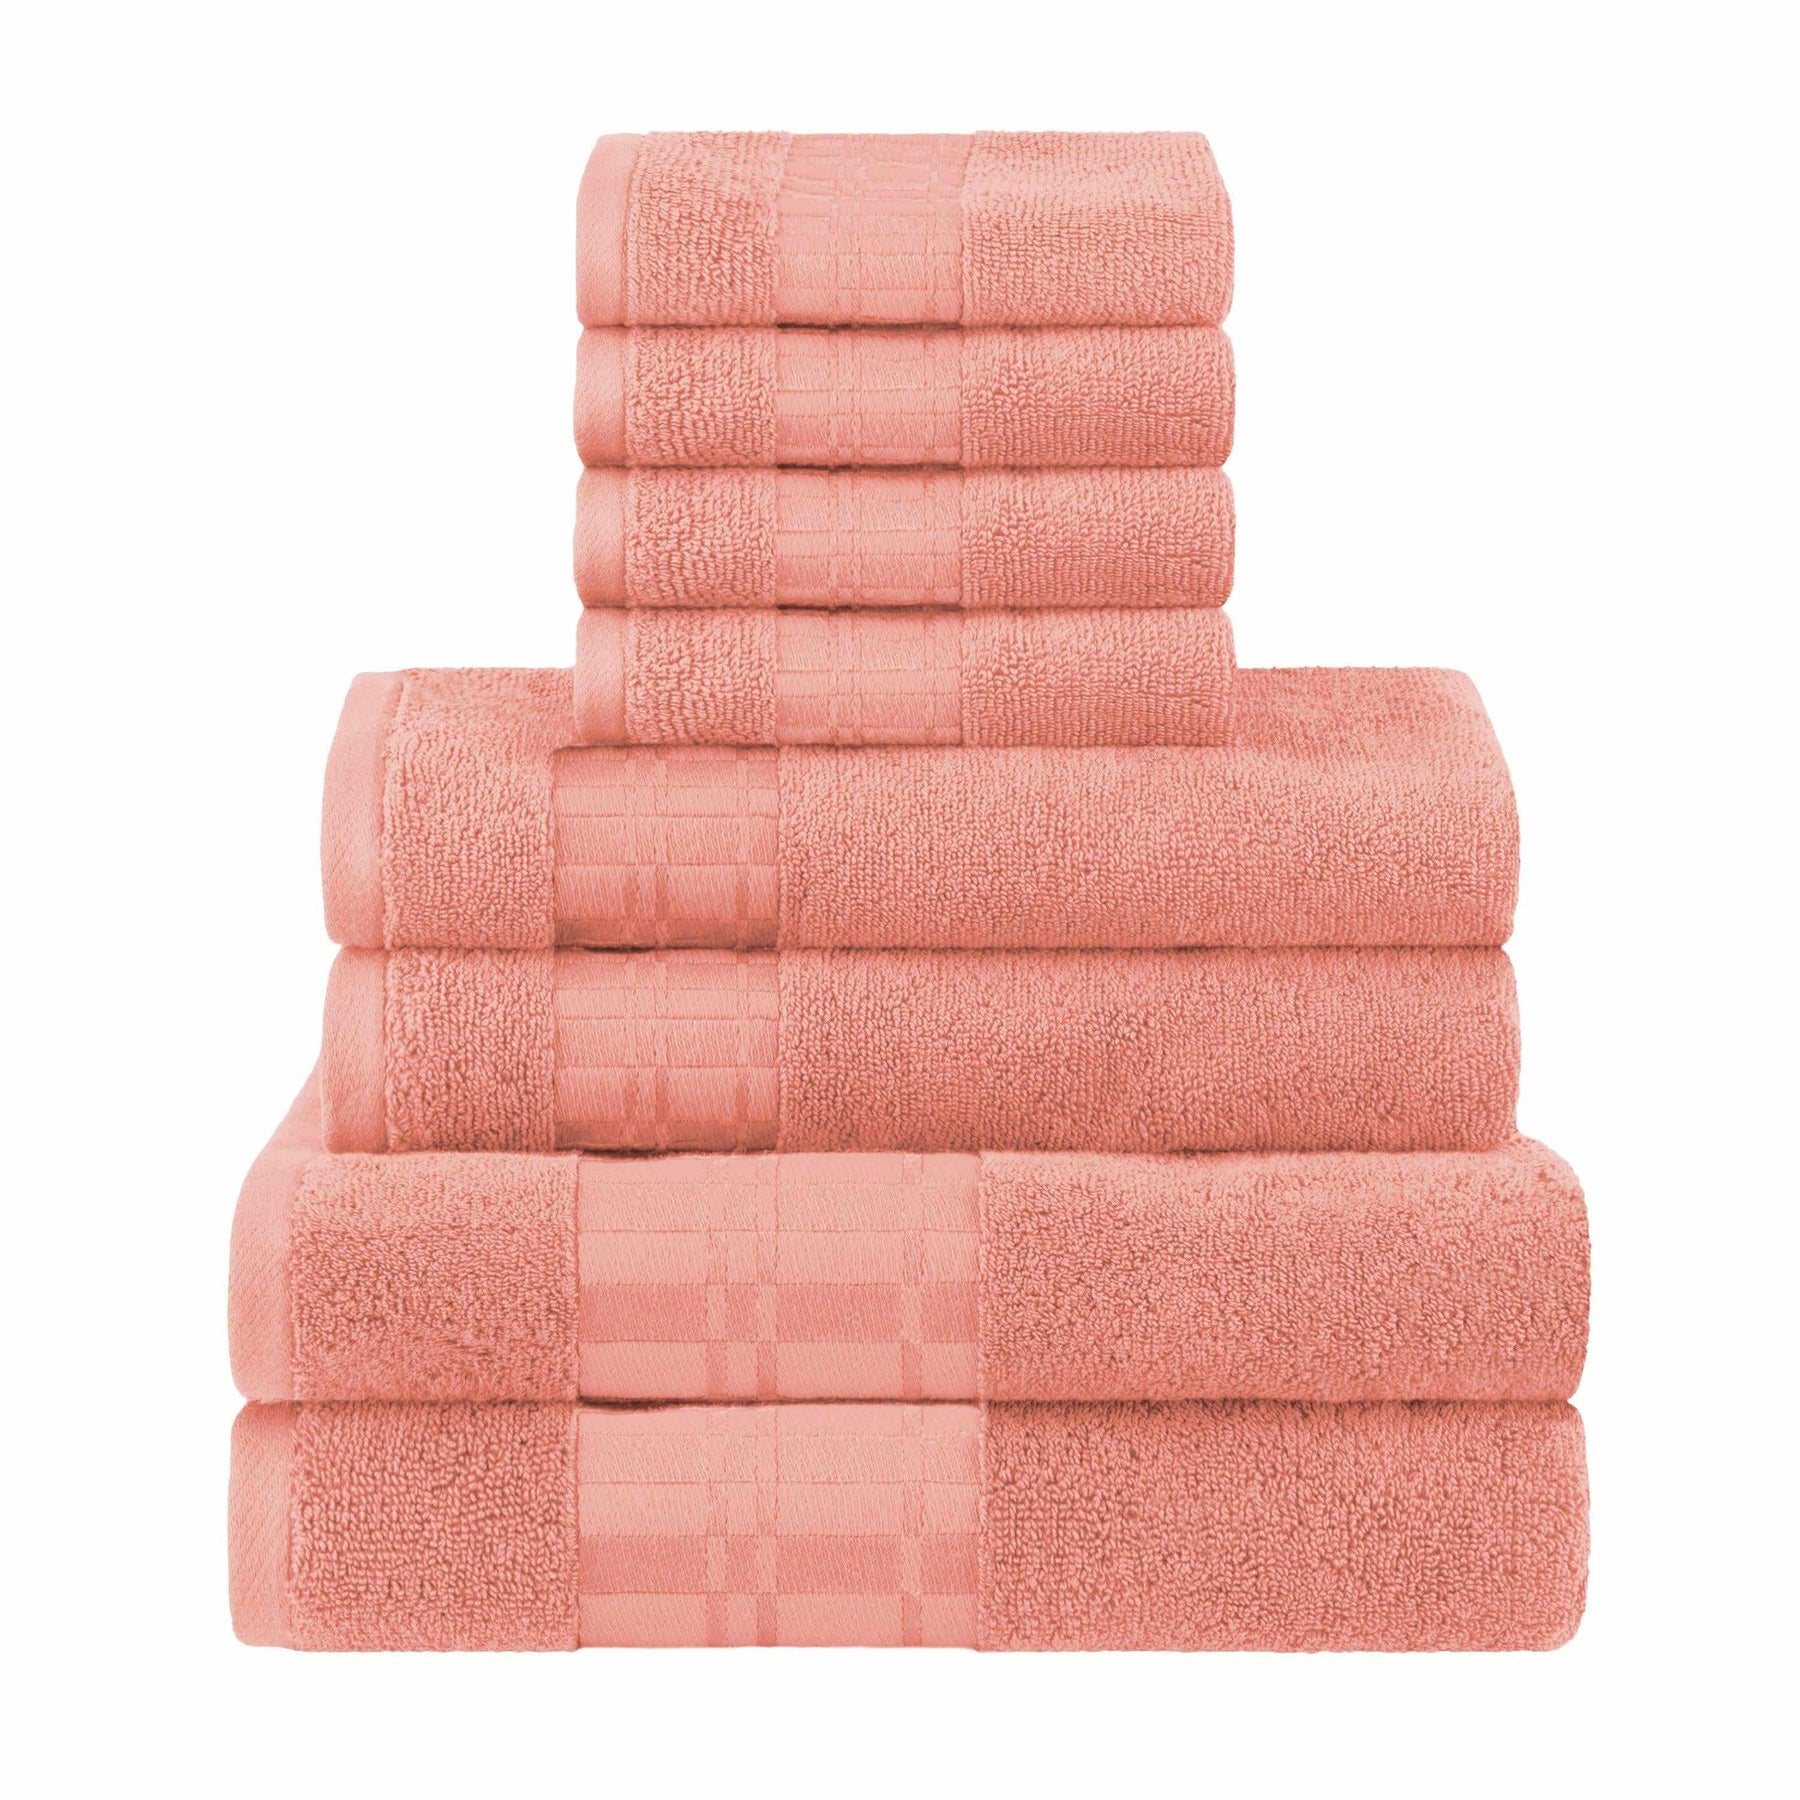  Superior Larissa Cotton 8-Piece Assorted Towel Set with Geometric Embroidered Jacquard Border - Coral